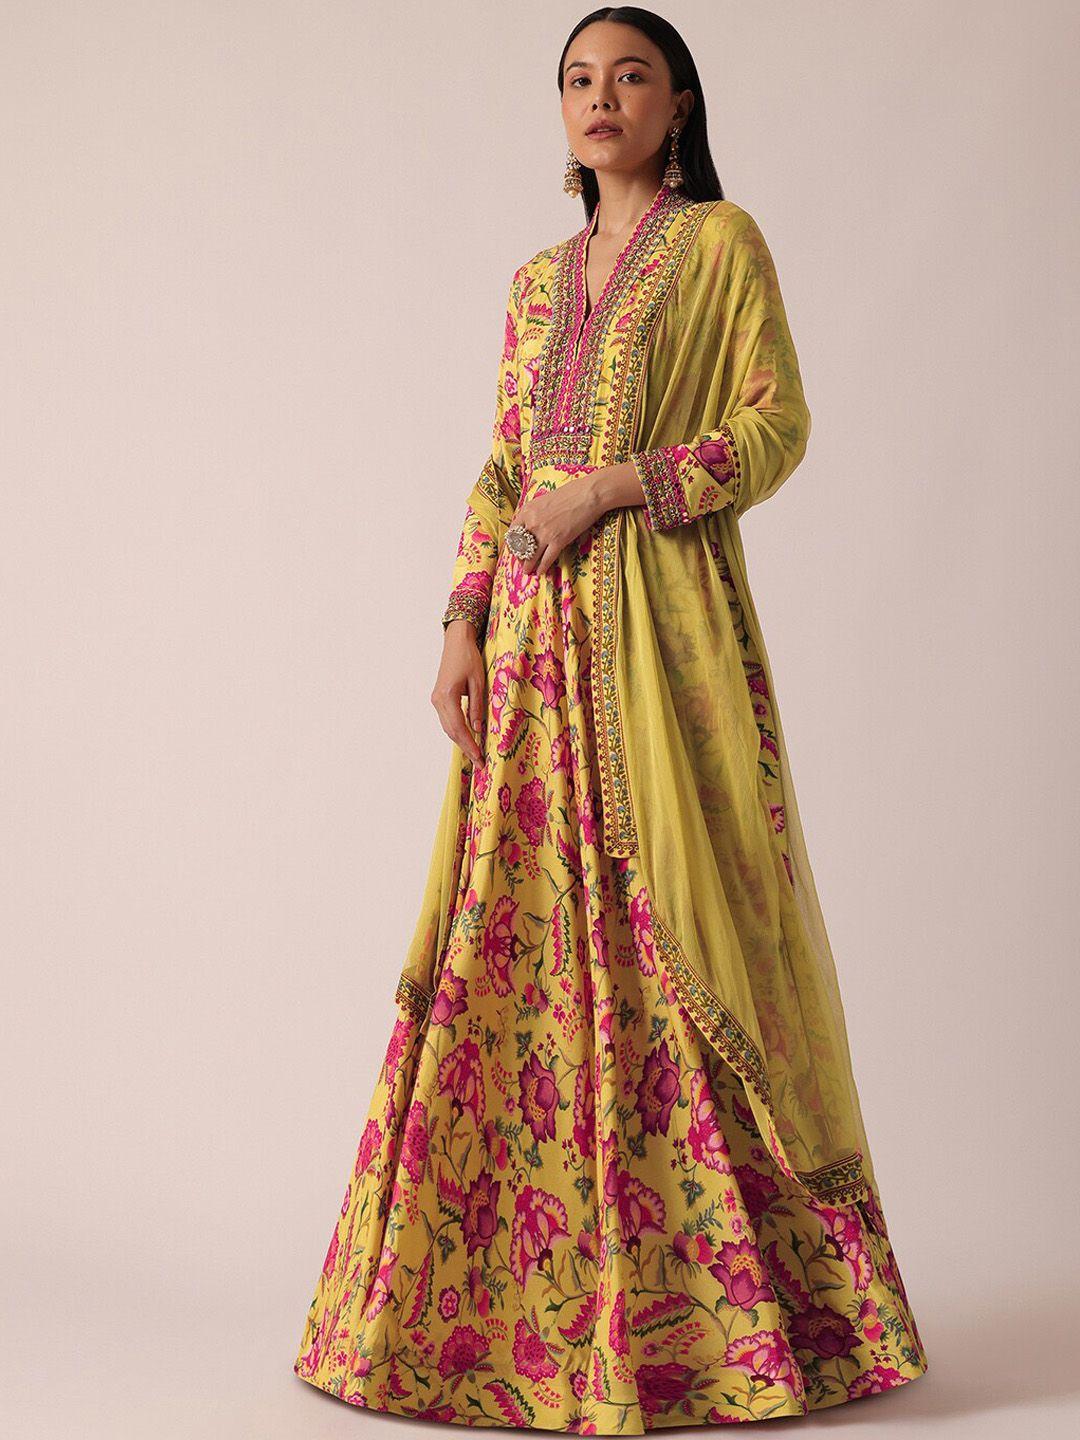 kalki-fashion-floral-printed-mirror-work-silk-fit-and-flare-maxi-ethnic-dress-with-dupatta